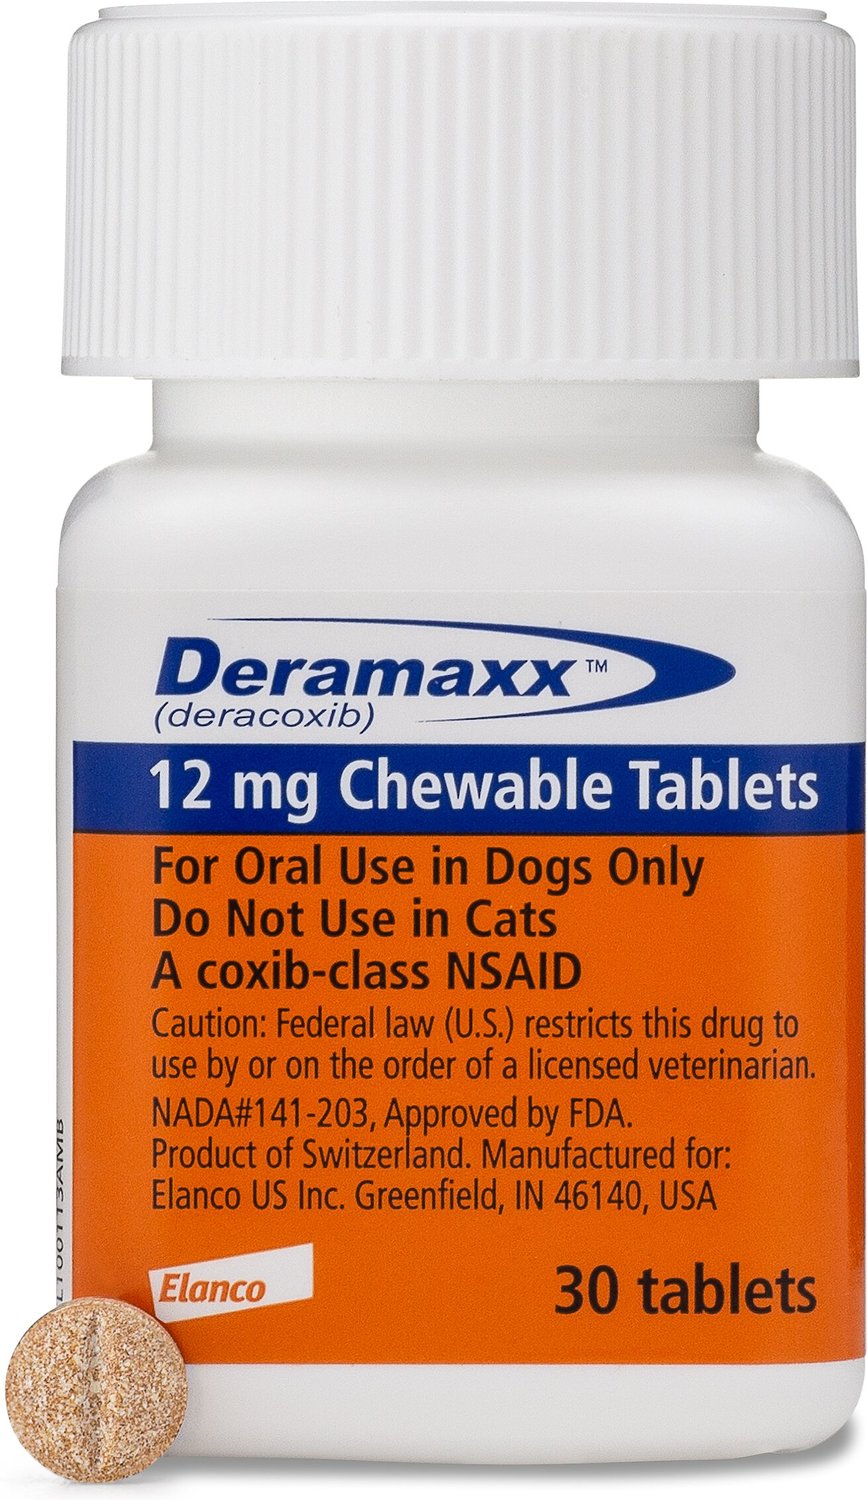 deramaxx-chewable-tablets-for-dogs-12-mg-30-tablets-chewy